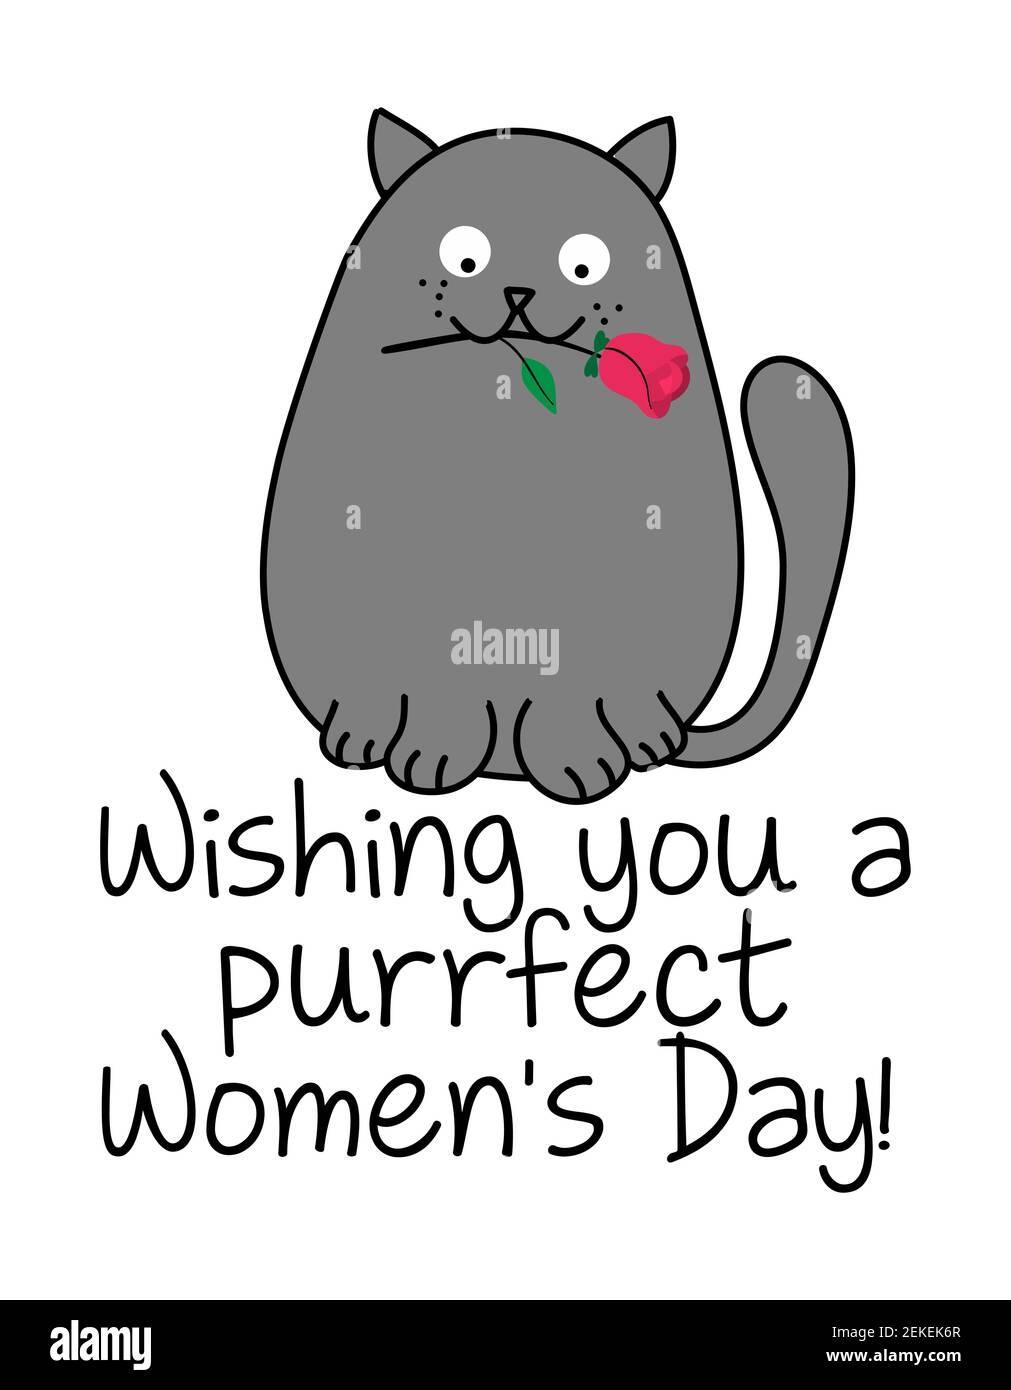 Wishing you a purrfect (perfect) Women's Day - Cute gray cat with a red rose, cartoon vector doodle illustration. Funny doodle animal. Stock Vector